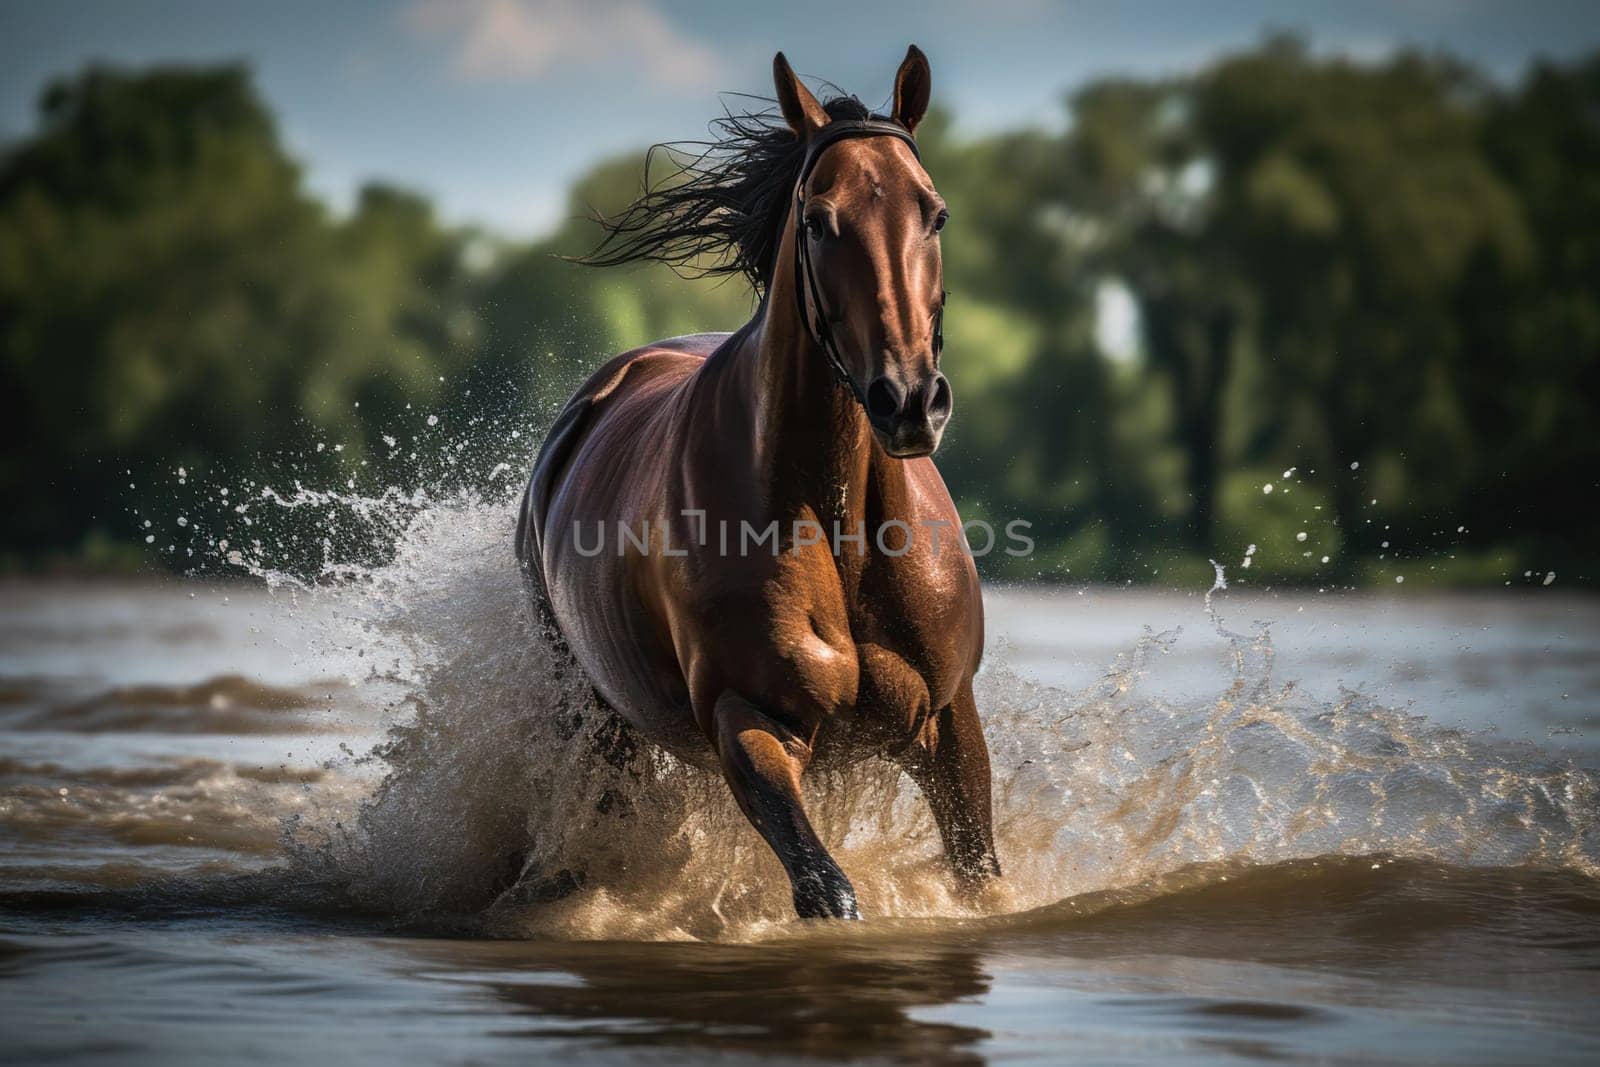 Fast Running Horse By Water by tan4ikk1